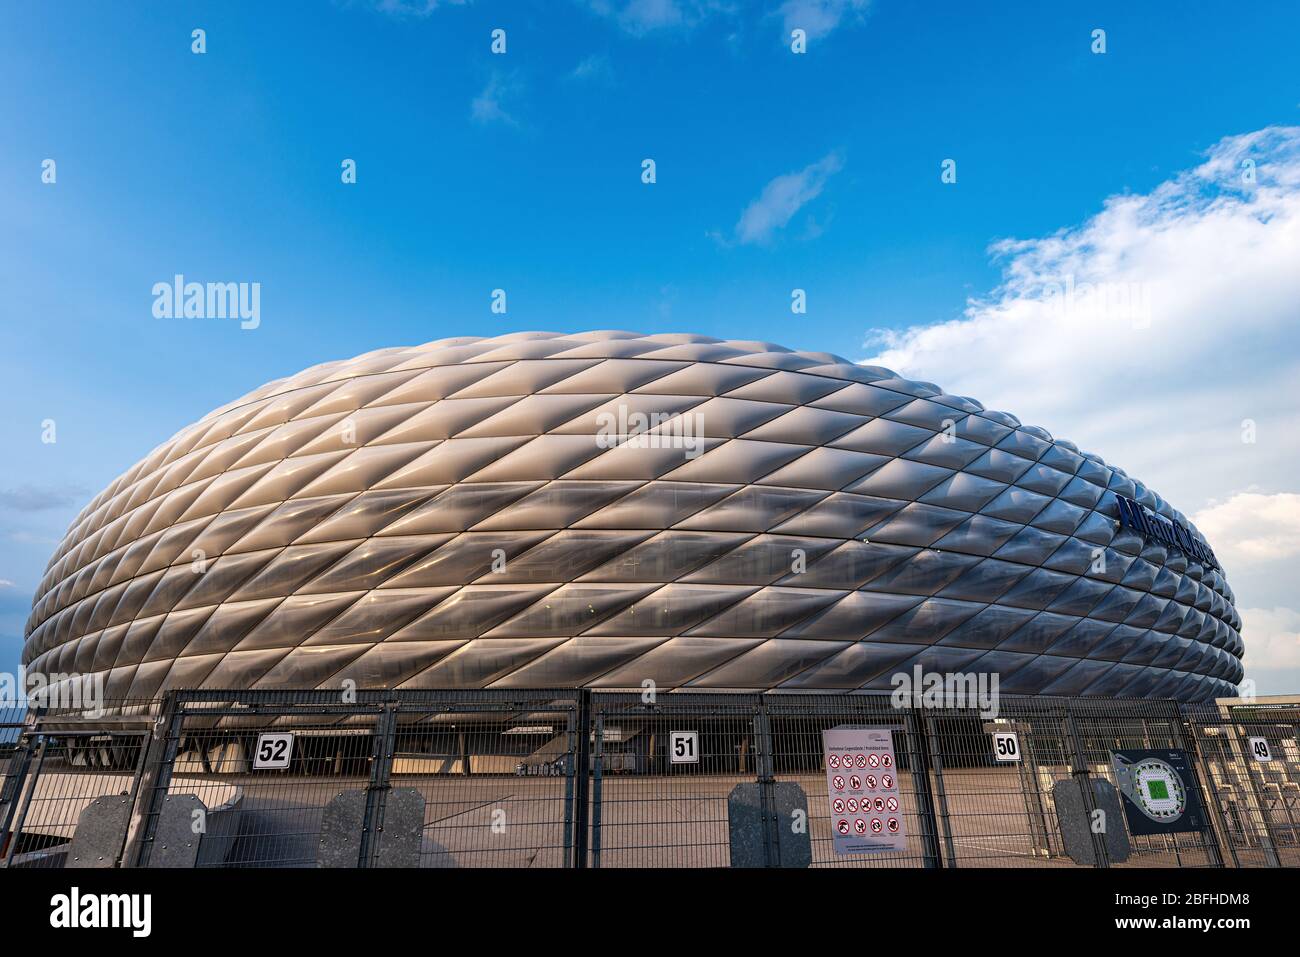 Allianz Arena The Home Football Stadium For Fc Bayern Munich Widely Known For Its Exterior Of Inflated Etfe Plastic Panels Stock Photo Alamy